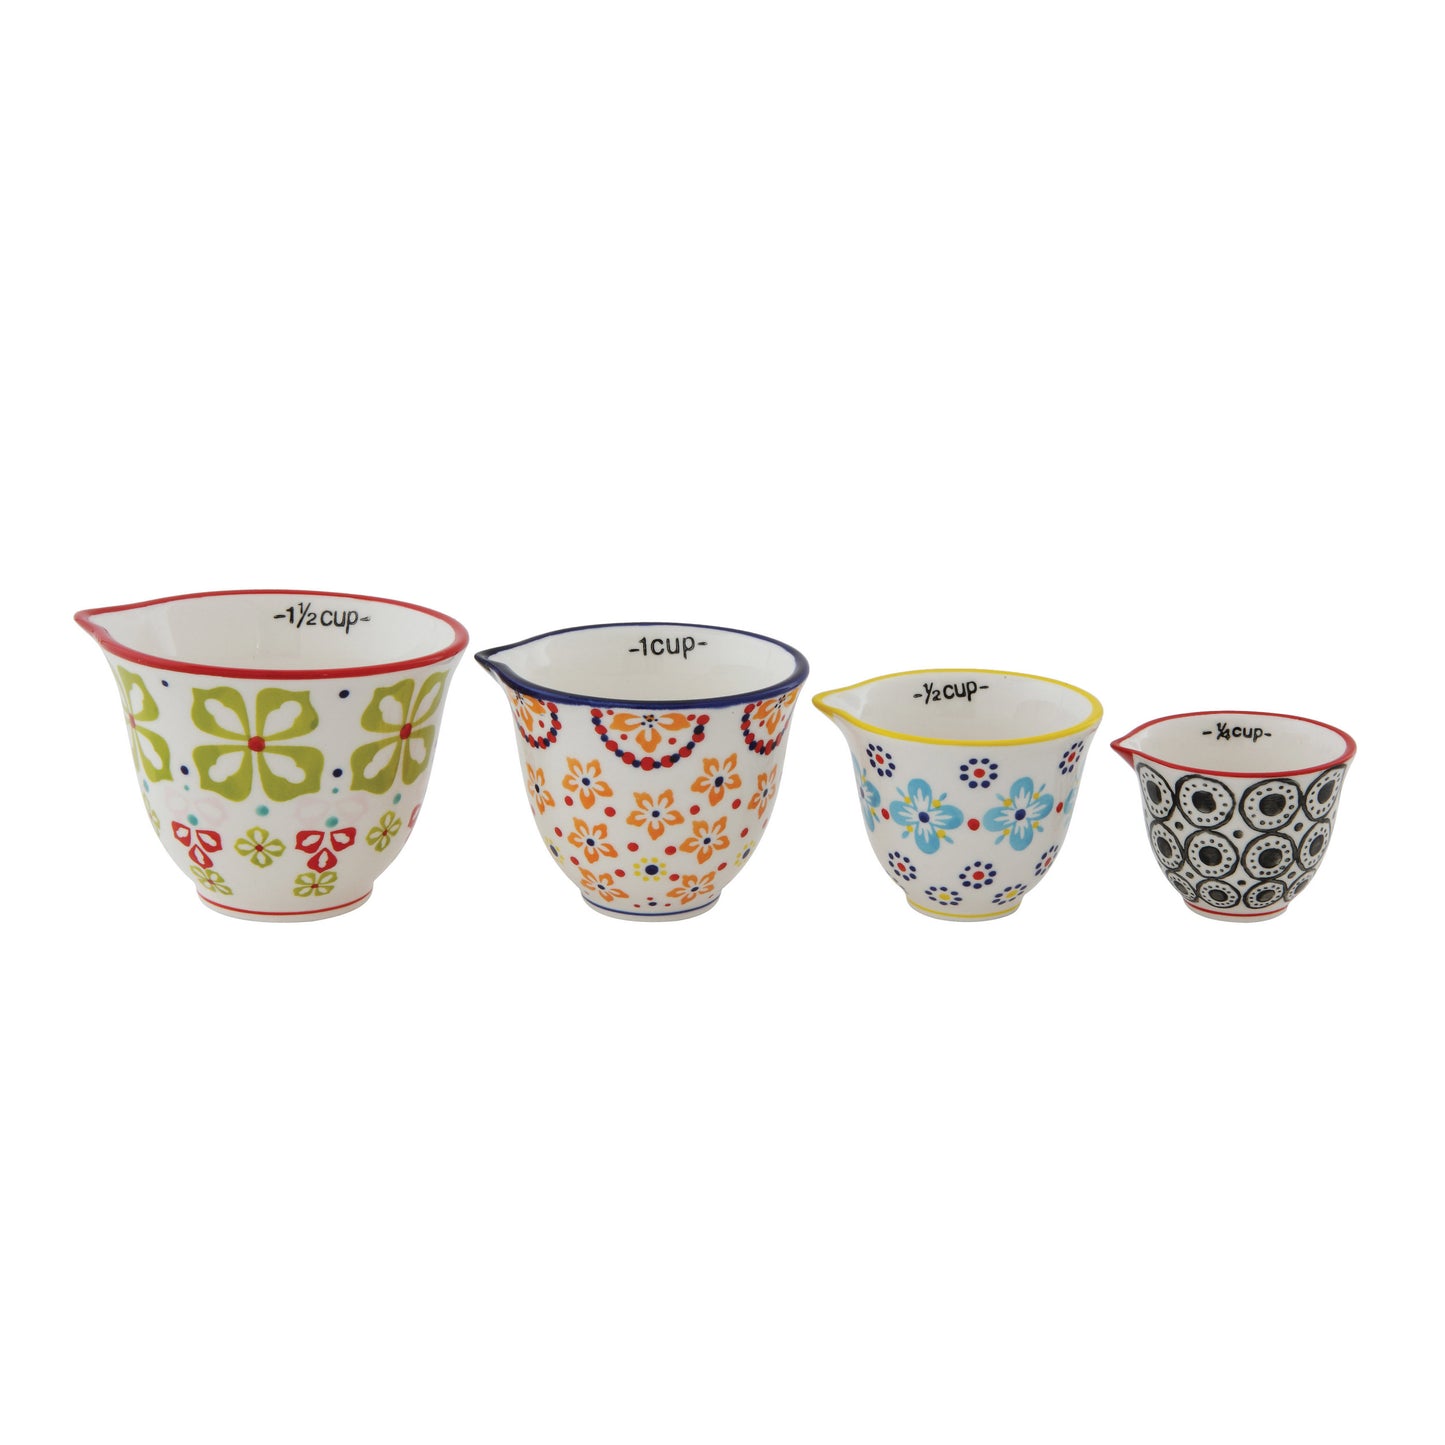 Measuring Cups with Floral Pattern, Set of 4